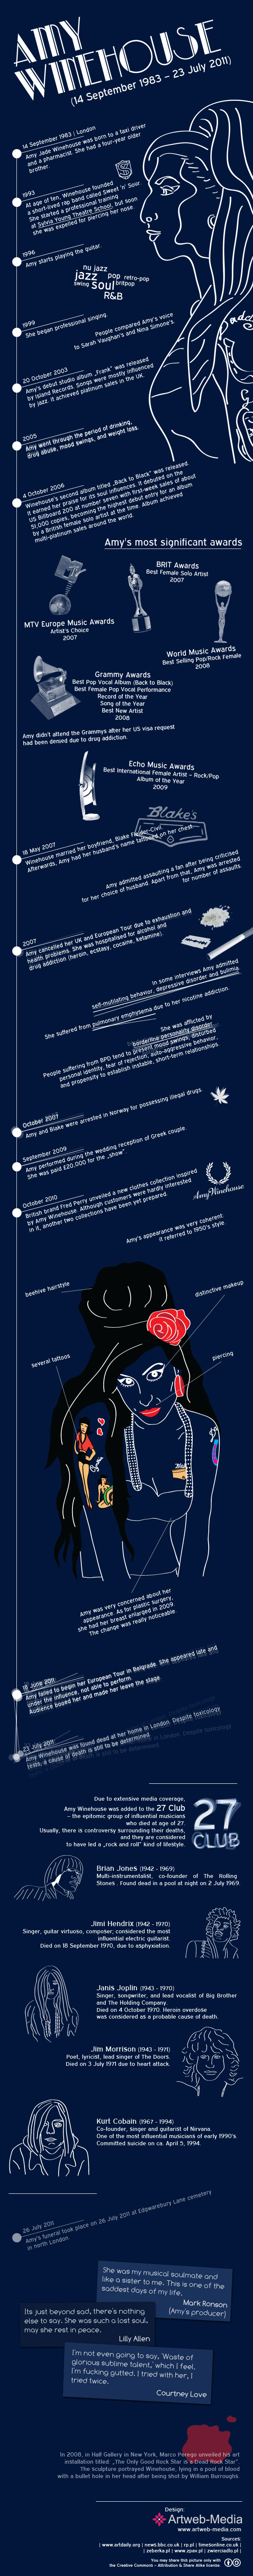 The Life Of Amy Winehouse Infographic